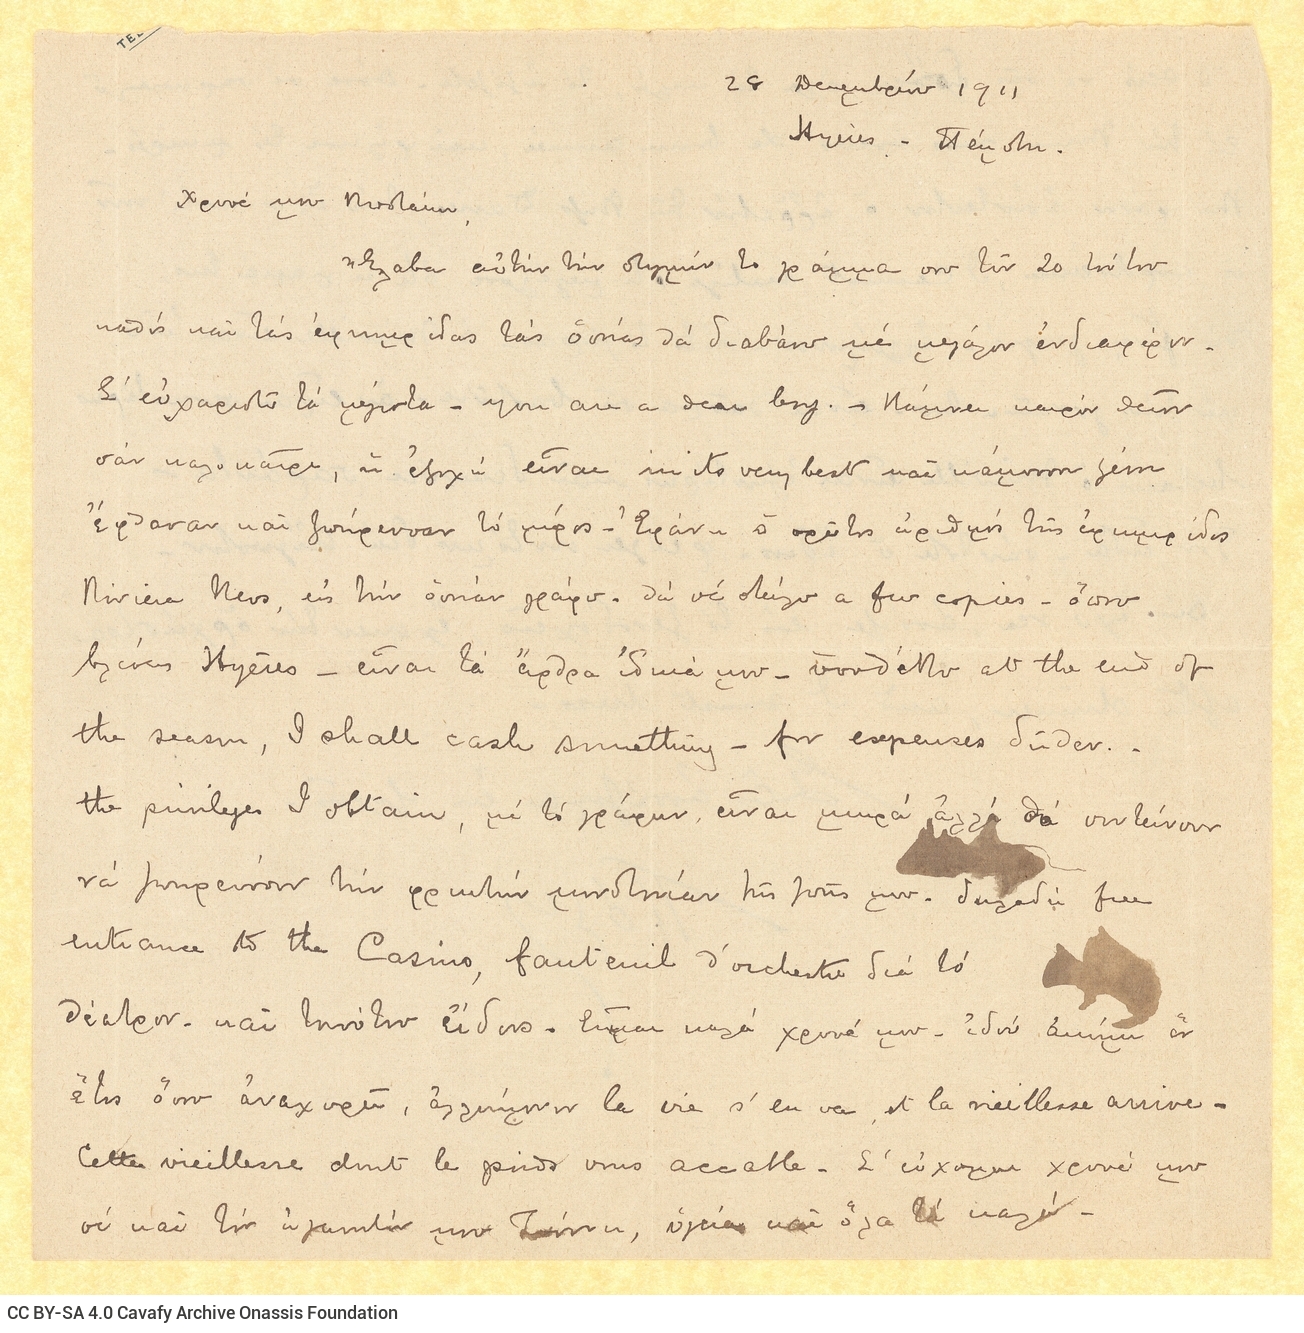 Handwritten letter by Paul Cavafy to C. P. Cavafy from Hyères, France, on both sides of a cut sheet. It is a reply to a lett